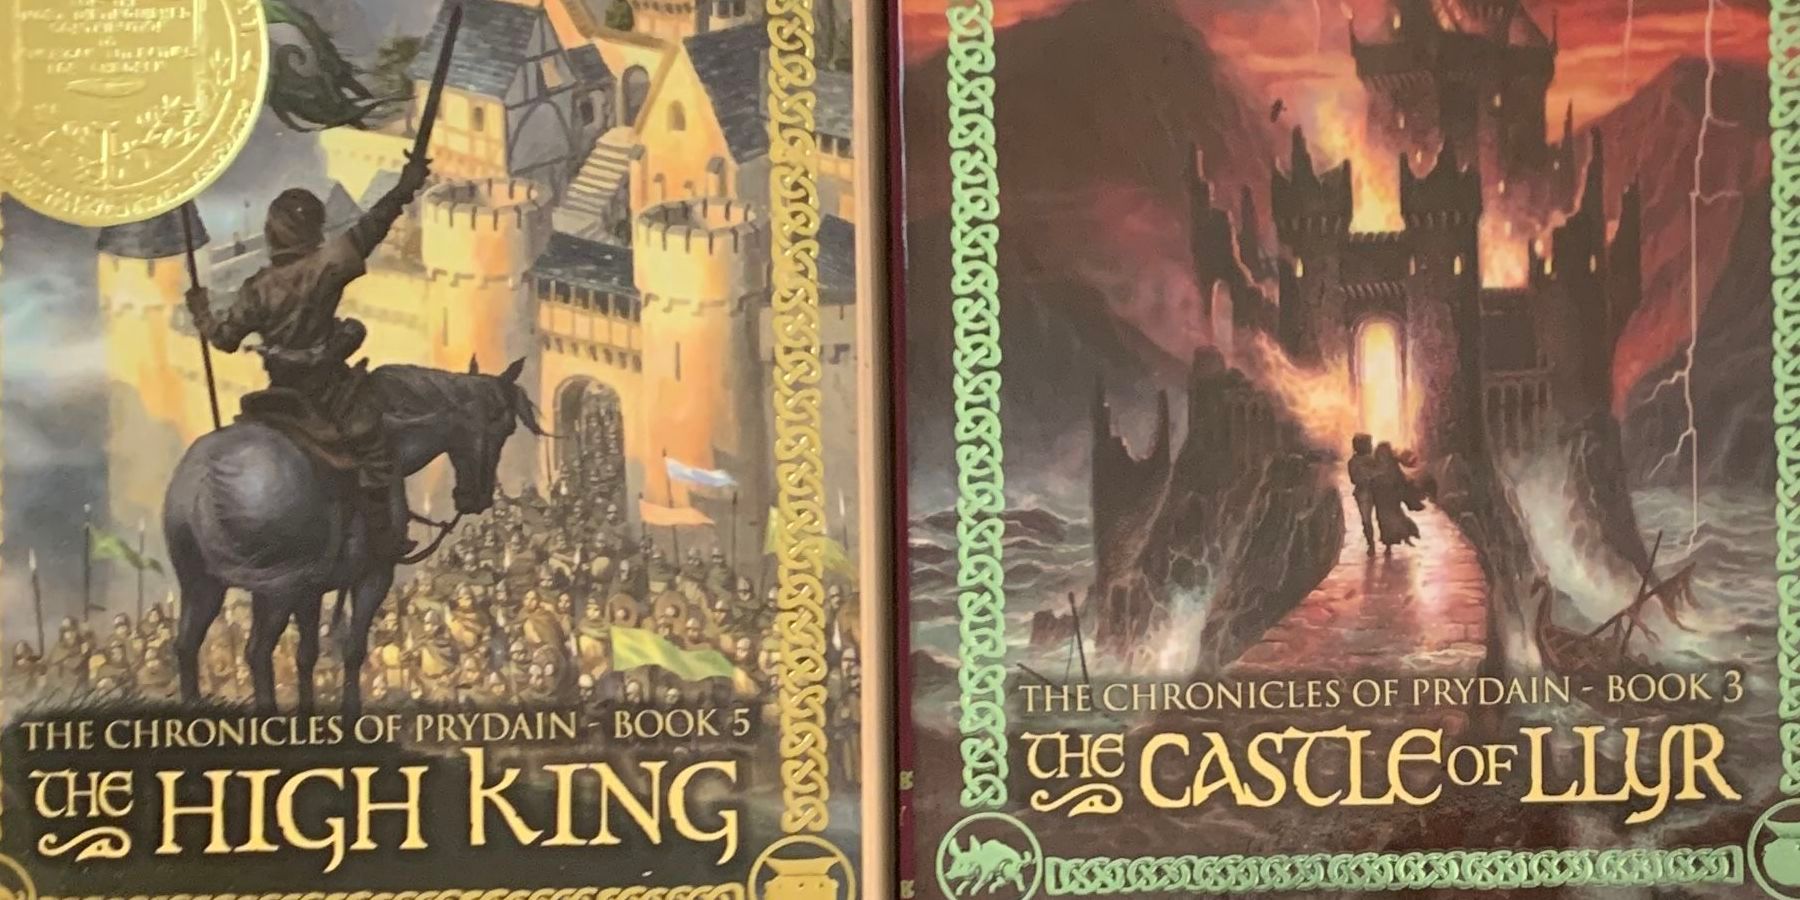 Two book covers from The Chronicles of Prydain series.